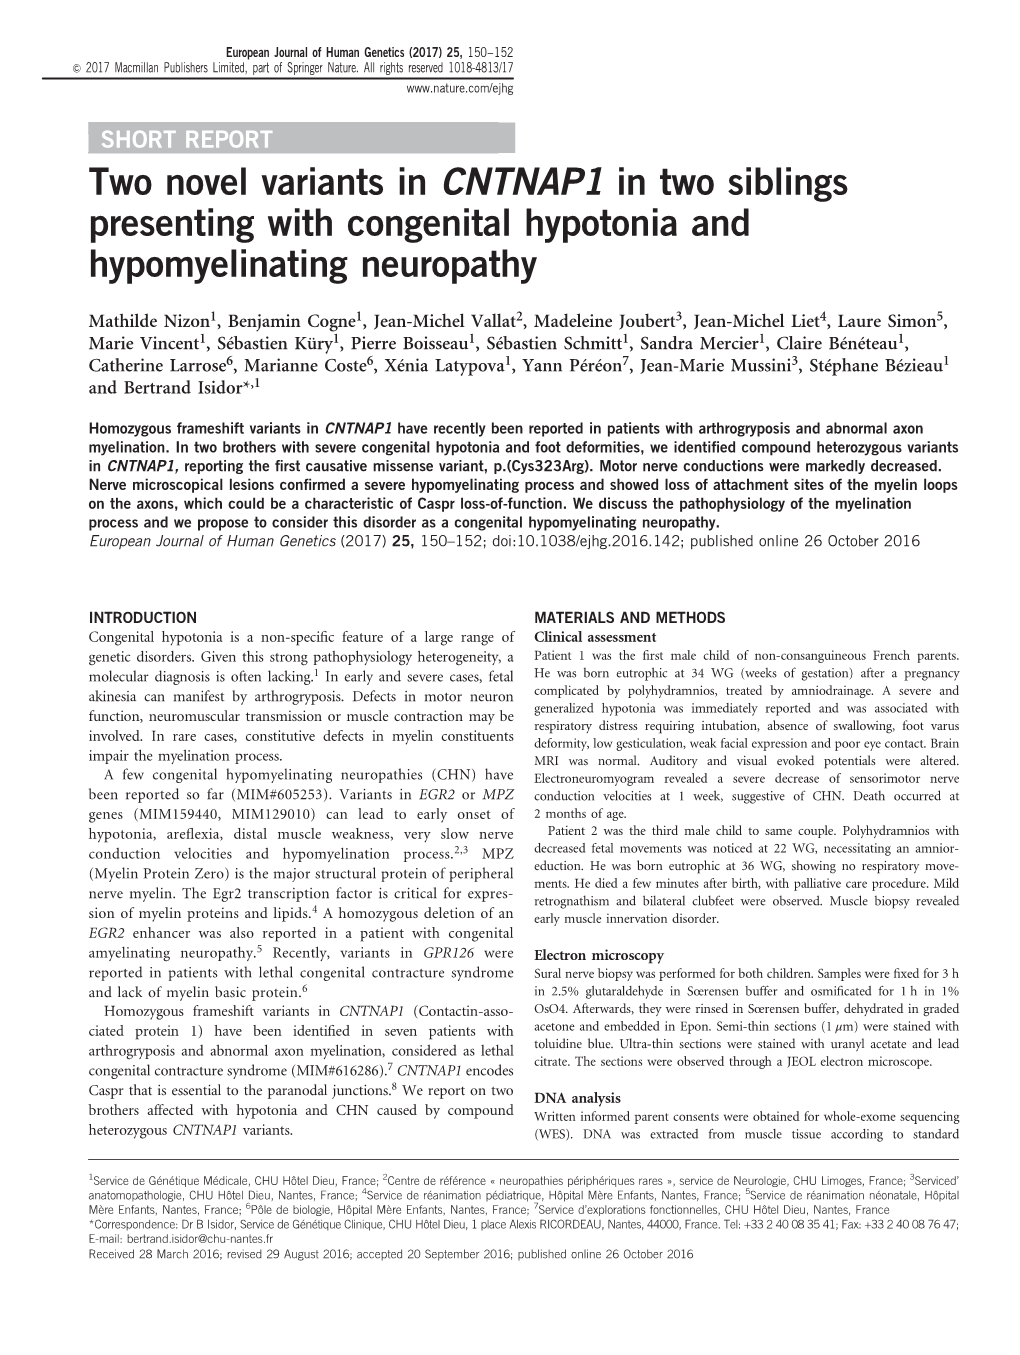 Two Novel Variants in CNTNAP1 in Two Siblings Presenting with Congenital Hypotonia and Hypomyelinating Neuropathy